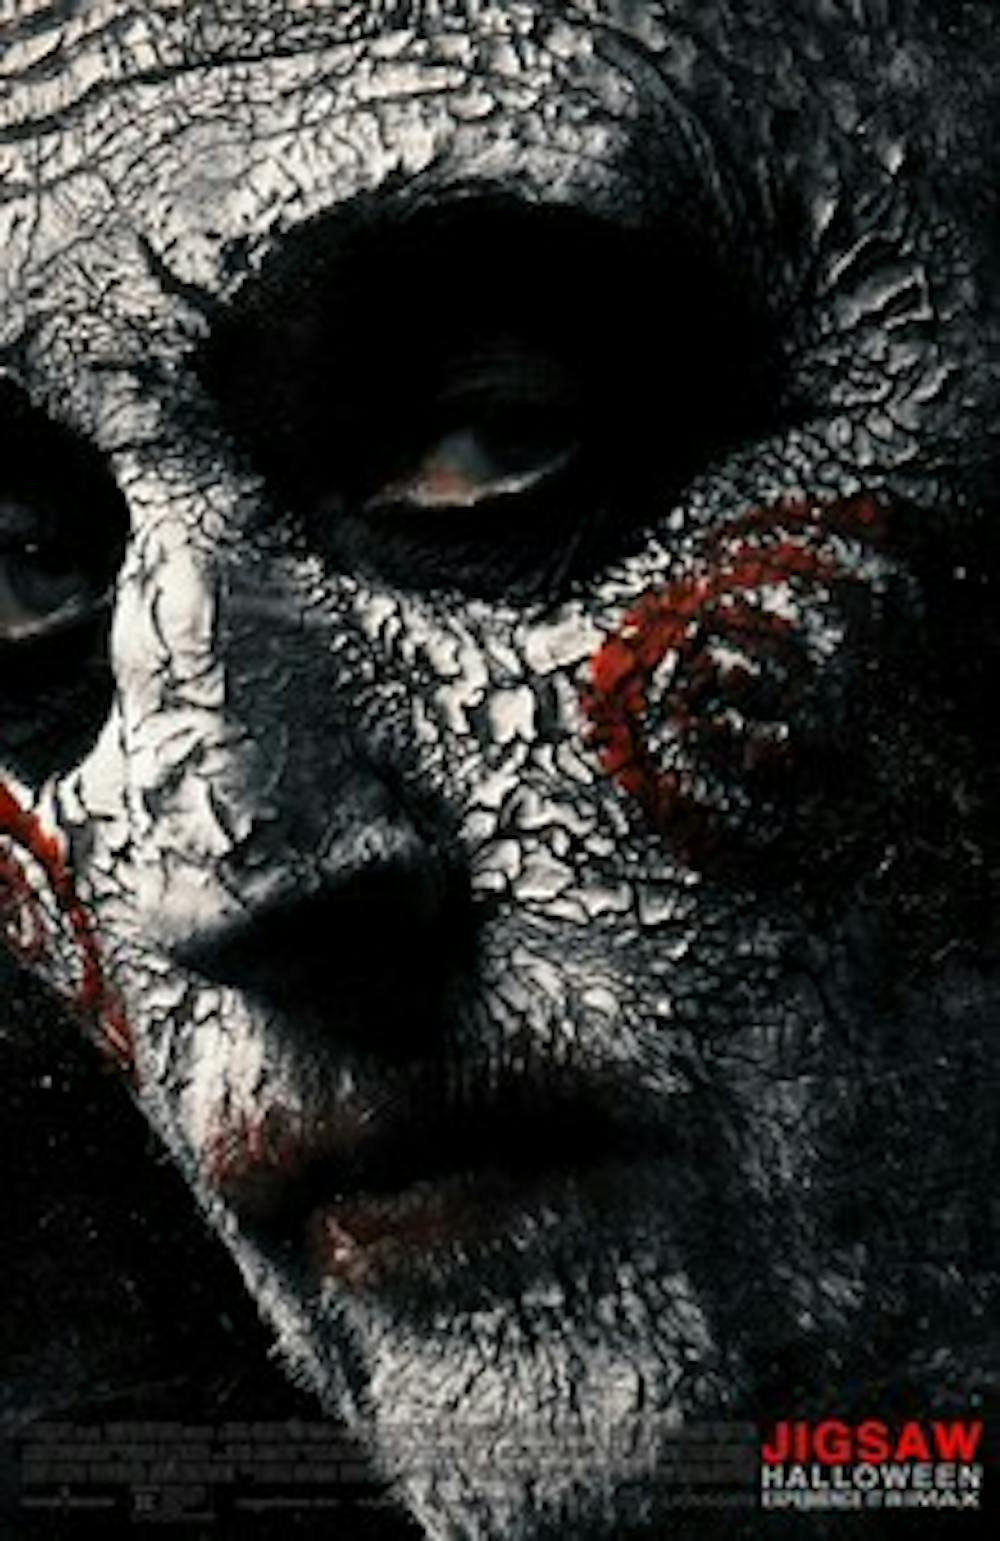 <p>"Jigsaw" is just another example of how modern horror movies lack imagination and style and rely instead on gore.</p>